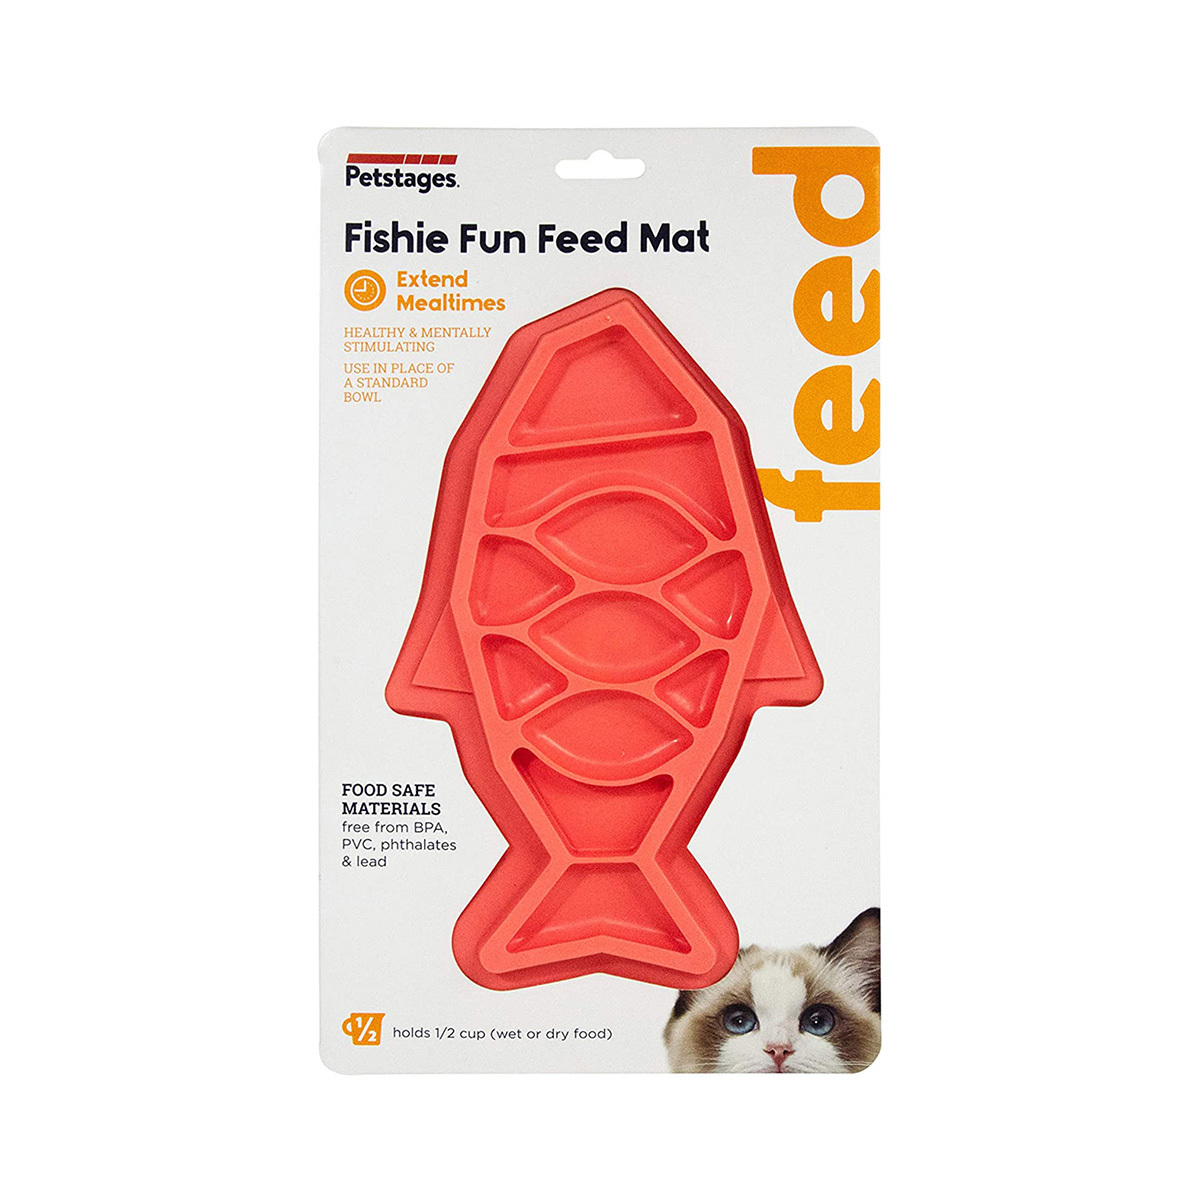 Petstages Fishie Fun Feed Mat Wet and Dry Slow Food Bowl for Cats - Pink image 2